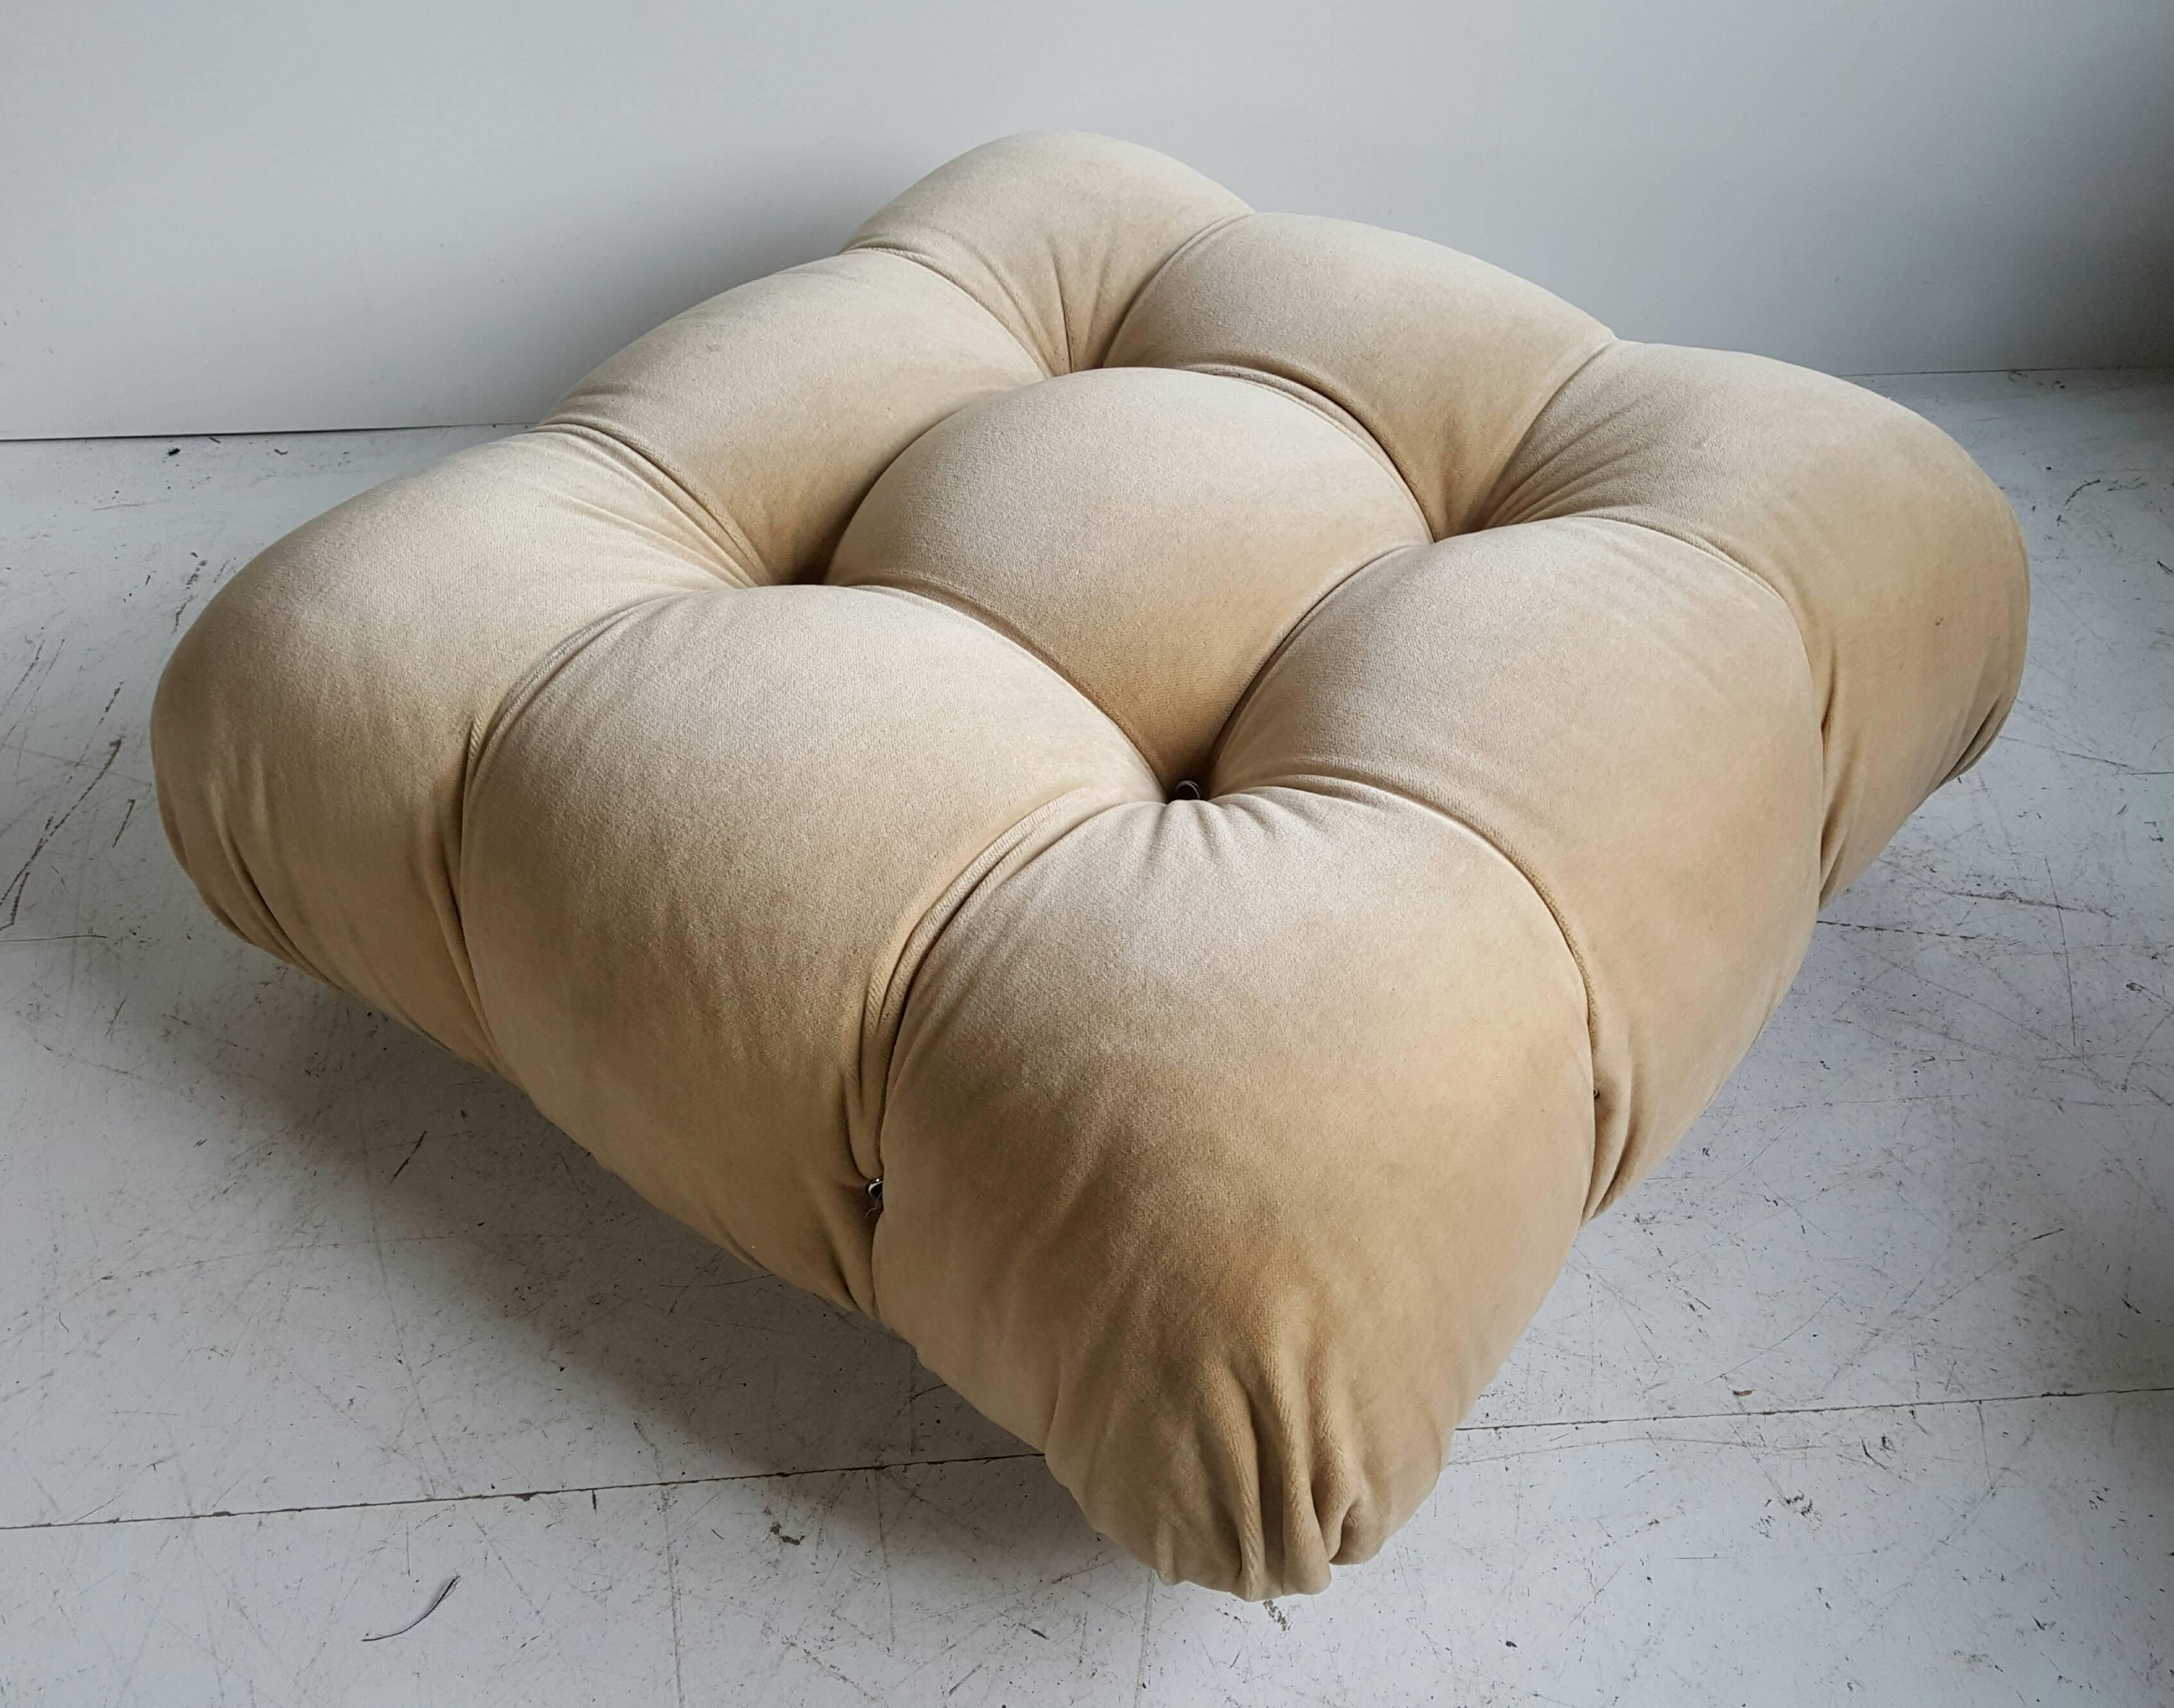 Large modular 'Cameleonda' ottoman, in original camel mohair upholstery, by Mario Bellini for C&B Italia, Italy, 1972. 
This design became famous almost immediately after it was featured in the exhibition 